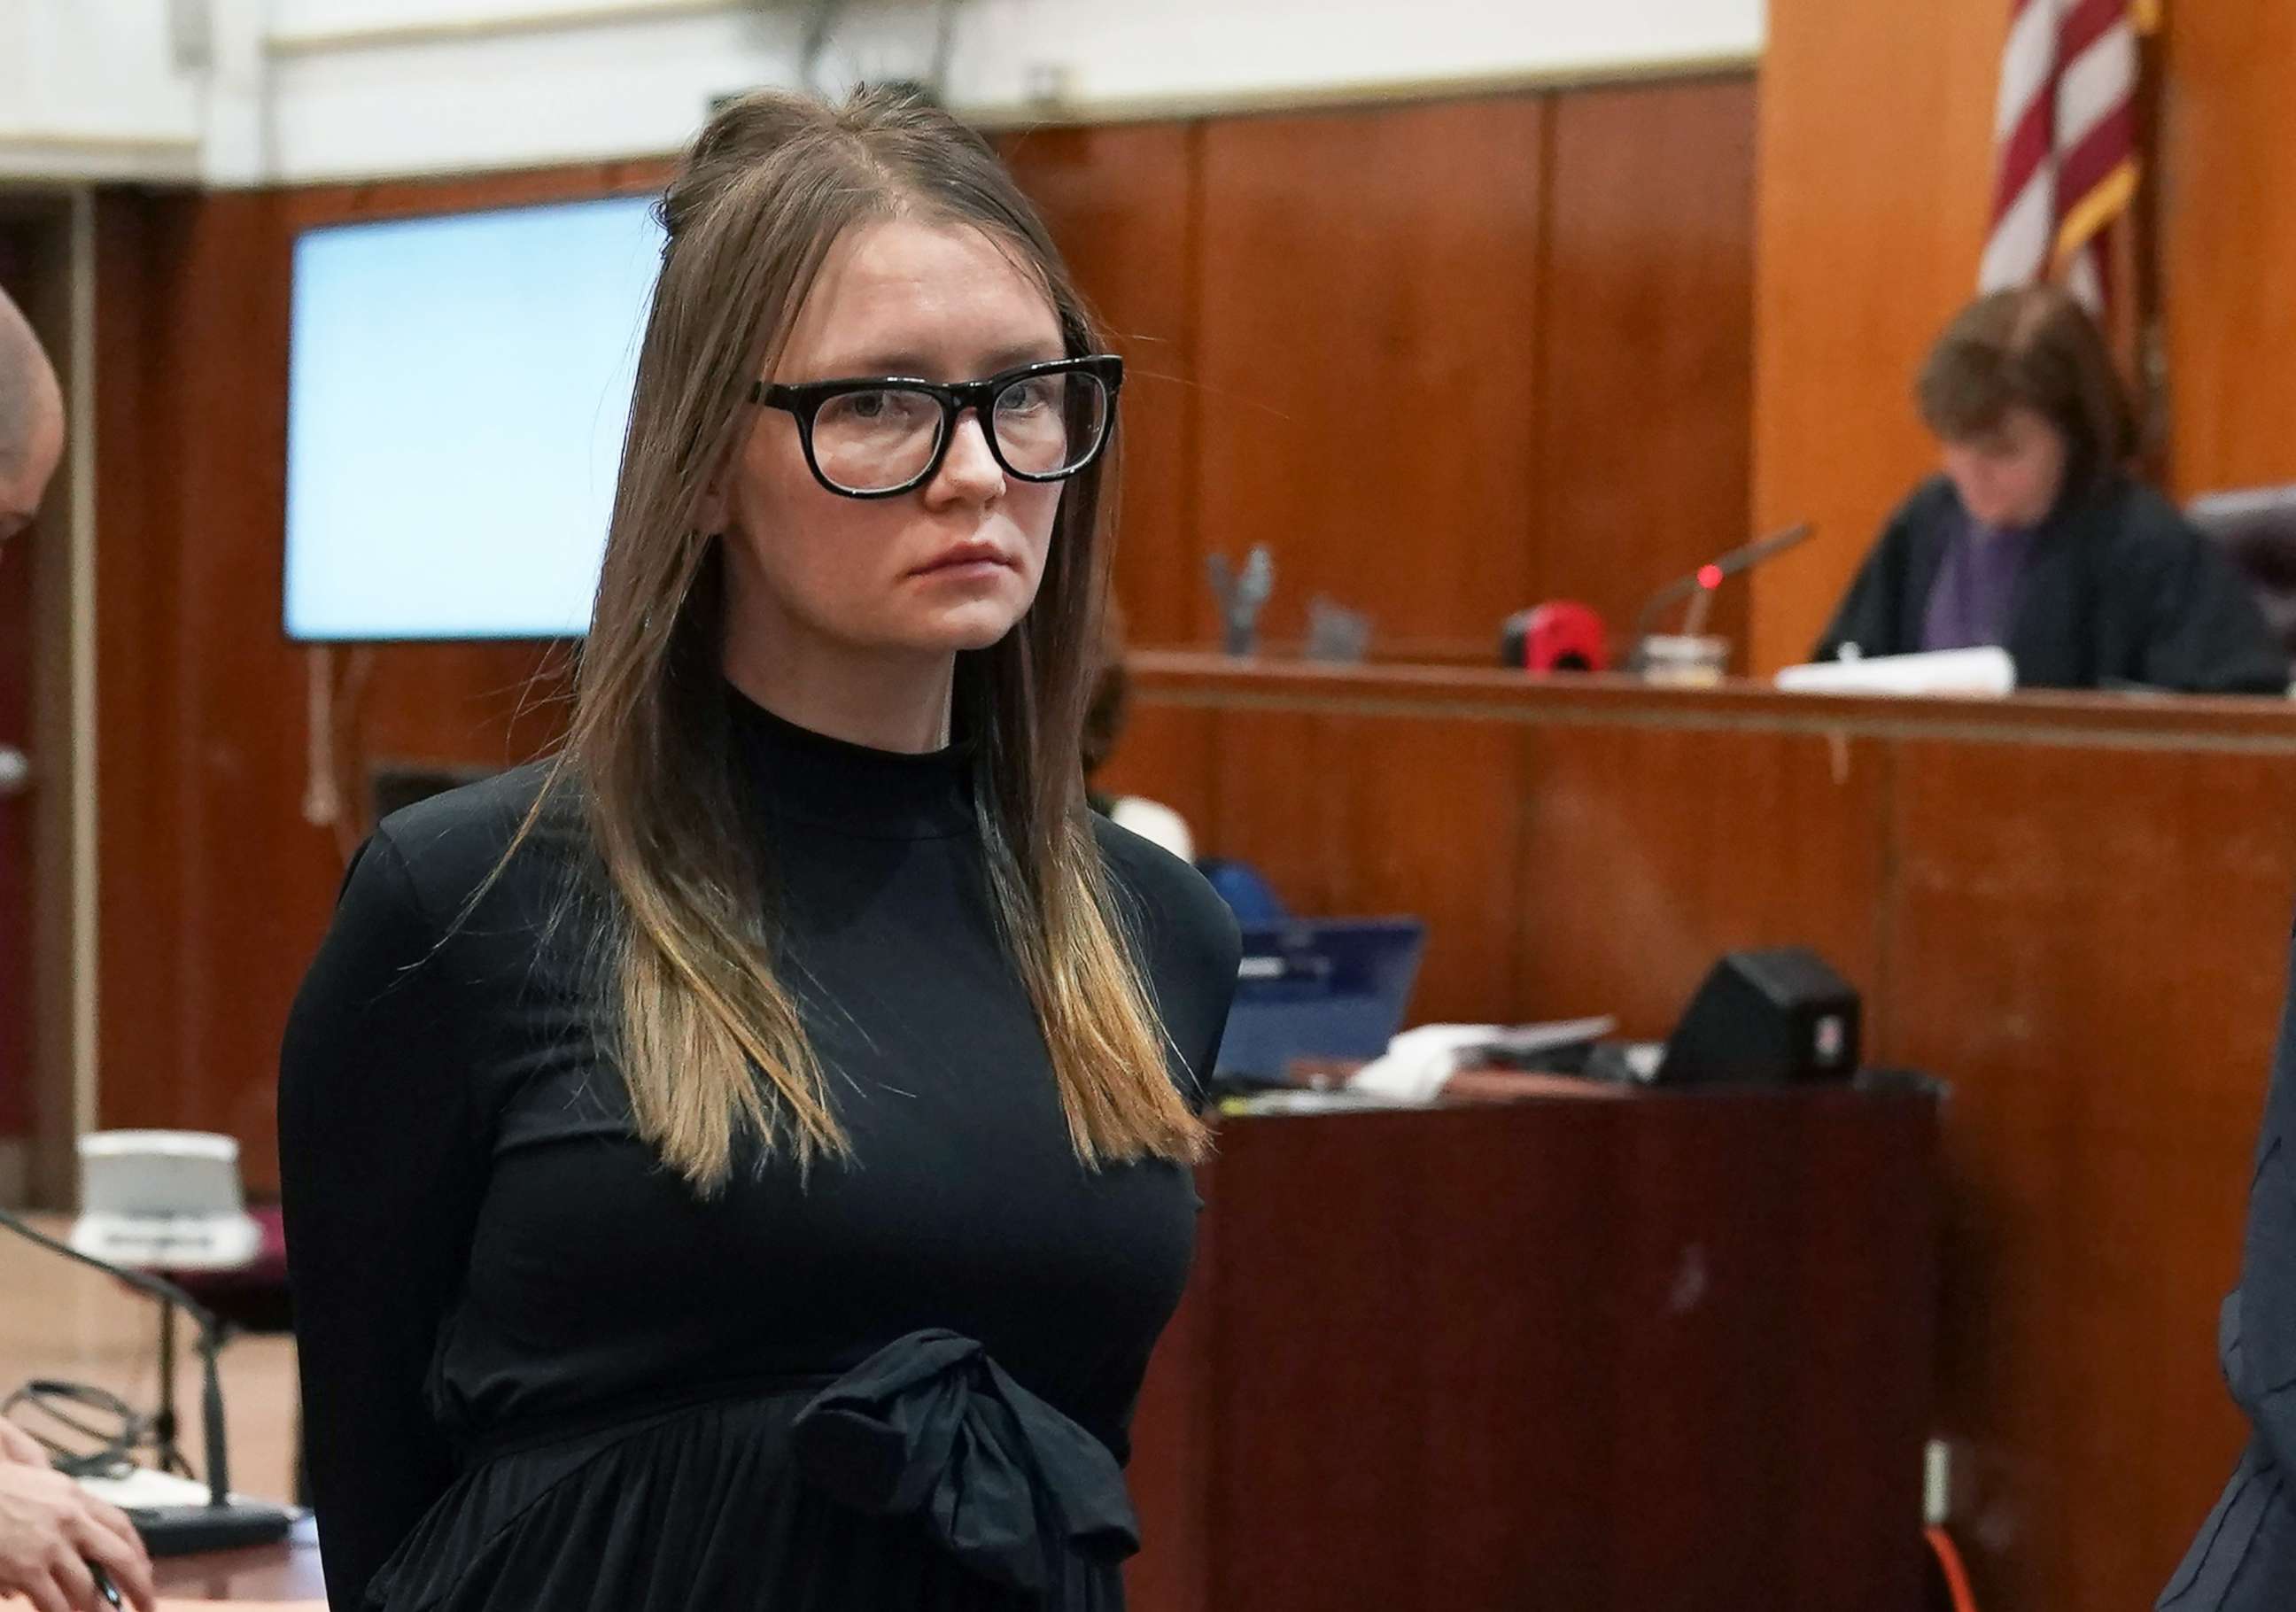 PHOTO: Fake German heiress Anna Sorokin is led away after being sentenced in Manhattan Supreme Court May 9, 2019, following her conviction last month on multiple counts of grand larceny and theft of services.